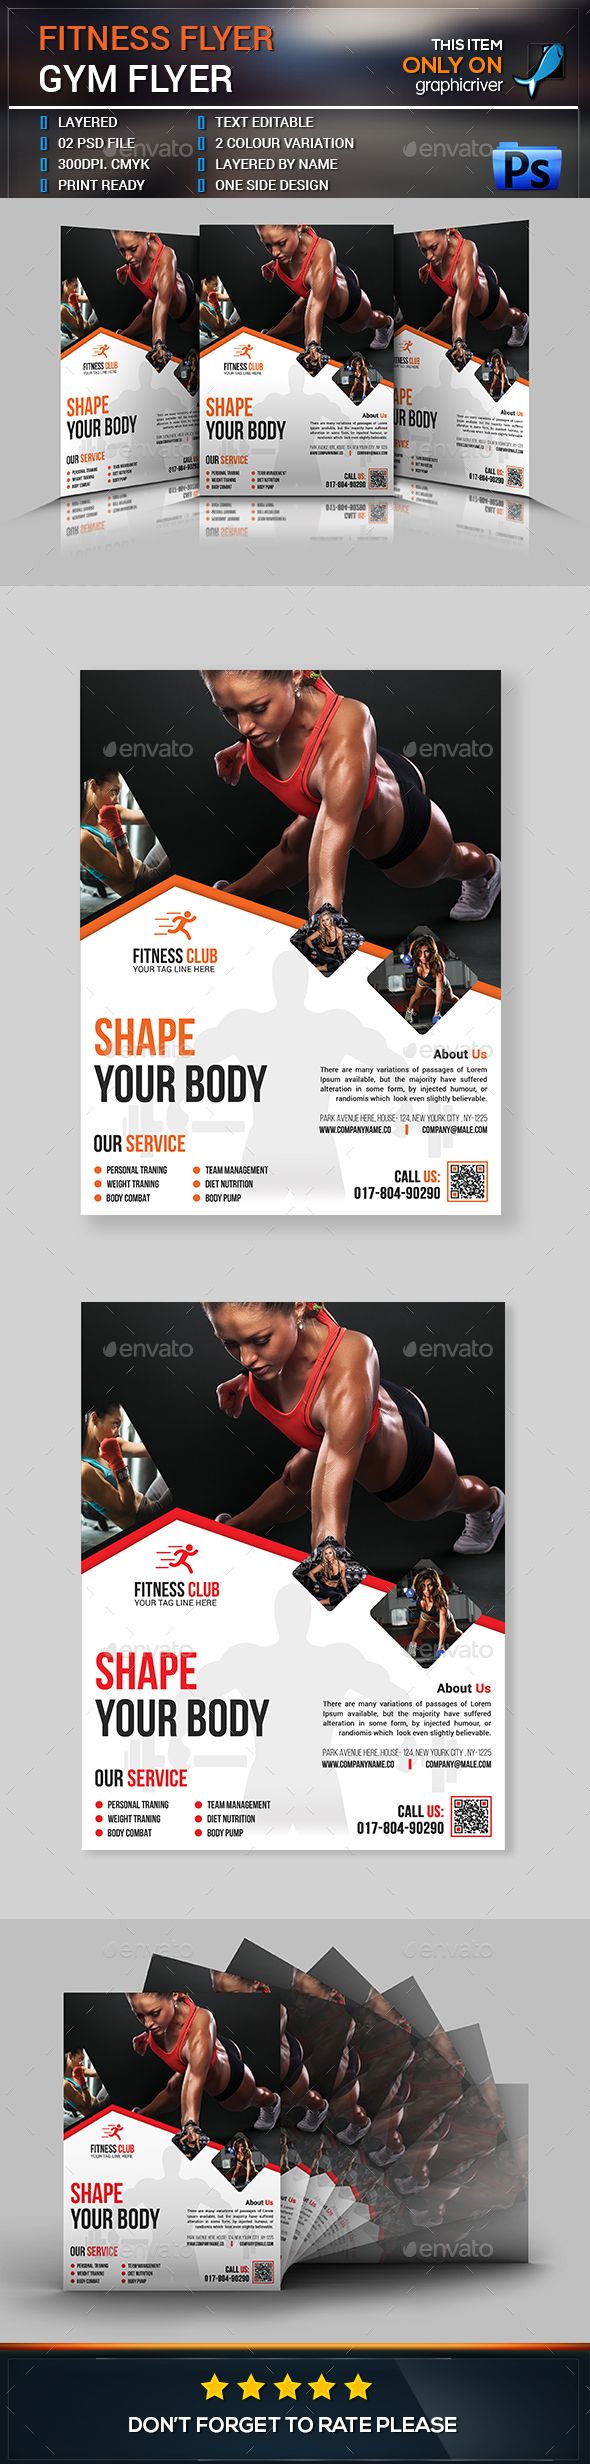 Healthcare-Advertising-Fitness-Flyer-Gym-Flyer-Sports-Events-Download-here-graphicriver.net Healthcare Advertising : #Fitness #Flyer / Gym Flyer - Sports Events Download here: graphicriver.net/...